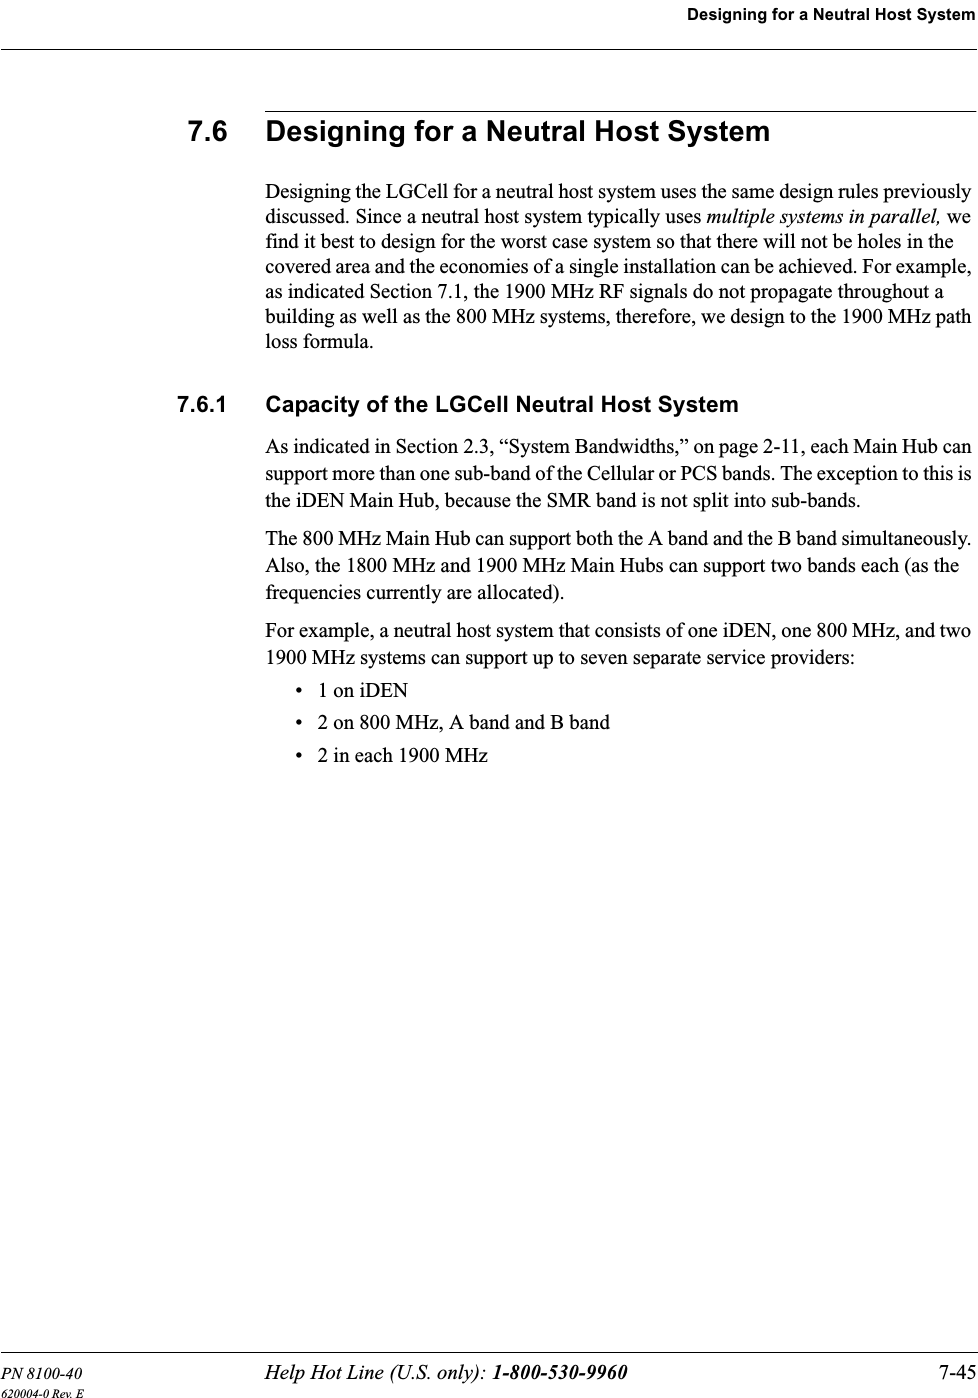 PN 8100-40 Help Hot Line (U.S. only): 1-800-530-9960 7-45620004-0 Rev. EDesigning for a Neutral Host System7.6 Designing for a Neutral Host SystemDesigning the LGCell for a neutral host system uses the same design rules previously discussed. Since a neutral host system typically uses multiple systems in parallel, we find it best to design for the worst case system so that there will not be holes in the covered area and the economies of a single installation can be achieved. For example, as indicated Section 7.1, the 1900 MHz RF signals do not propagate throughout a building as well as the 800 MHz systems, therefore, we design to the 1900 MHz path loss formula.7.6.1 Capacity of the LGCell Neutral Host SystemAs indicated in Section 2.3, “System Bandwidths,” on page 2-11, each Main Hub can support more than one sub-band of the Cellular or PCS bands. The exception to this is the iDEN Main Hub, because the SMR band is not split into sub-bands.The 800 MHz Main Hub can support both the A band and the B band simultaneously. Also, the 1800 MHz and 1900 MHz Main Hubs can support two bands each (as the frequencies currently are allocated).For example, a neutral host system that consists of one iDEN, one 800 MHz, and two 1900 MHz systems can support up to seven separate service providers:• 1 on iDEN• 2 on 800 MHz, A band and B band• 2 in each 1900 MHz